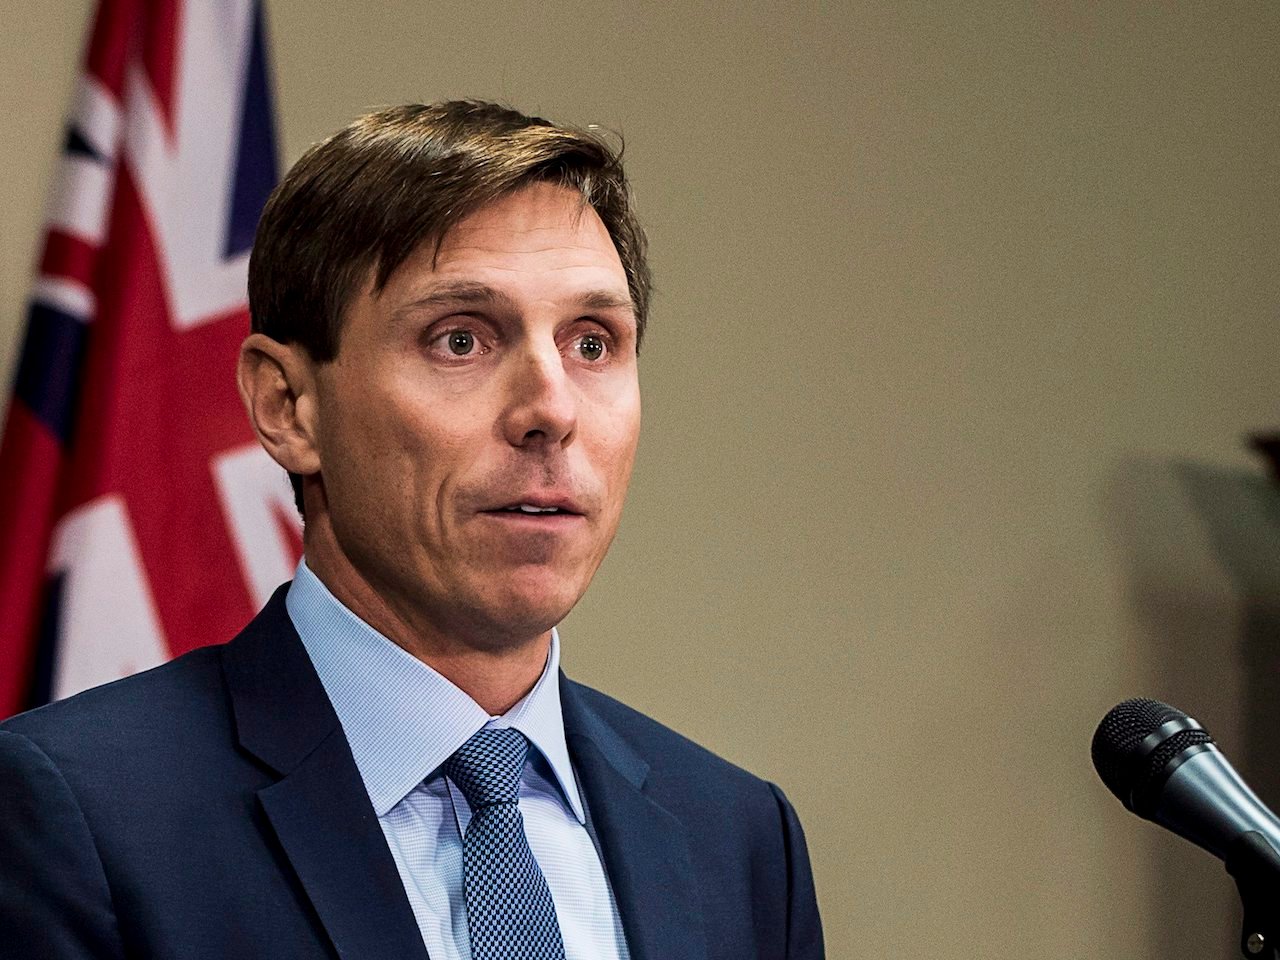 Who is Patrick Brown: Ontario Progressive Conservative Leader Patrick Brown speaks at a press conference at Queen's Park in Toronto on Wednesday, January 24, 2018. Ontario Progressive Conservative Leader Patrick Brown says he "categorically'' denies "troubling allegations'' about his conduct. A visibly emotional Brown said he was made aware of the allegations earlier on Wednesday, but he did not provide details on what those allegations are. THE CANADIAN PRESS/Aaron Vincent Elkaim